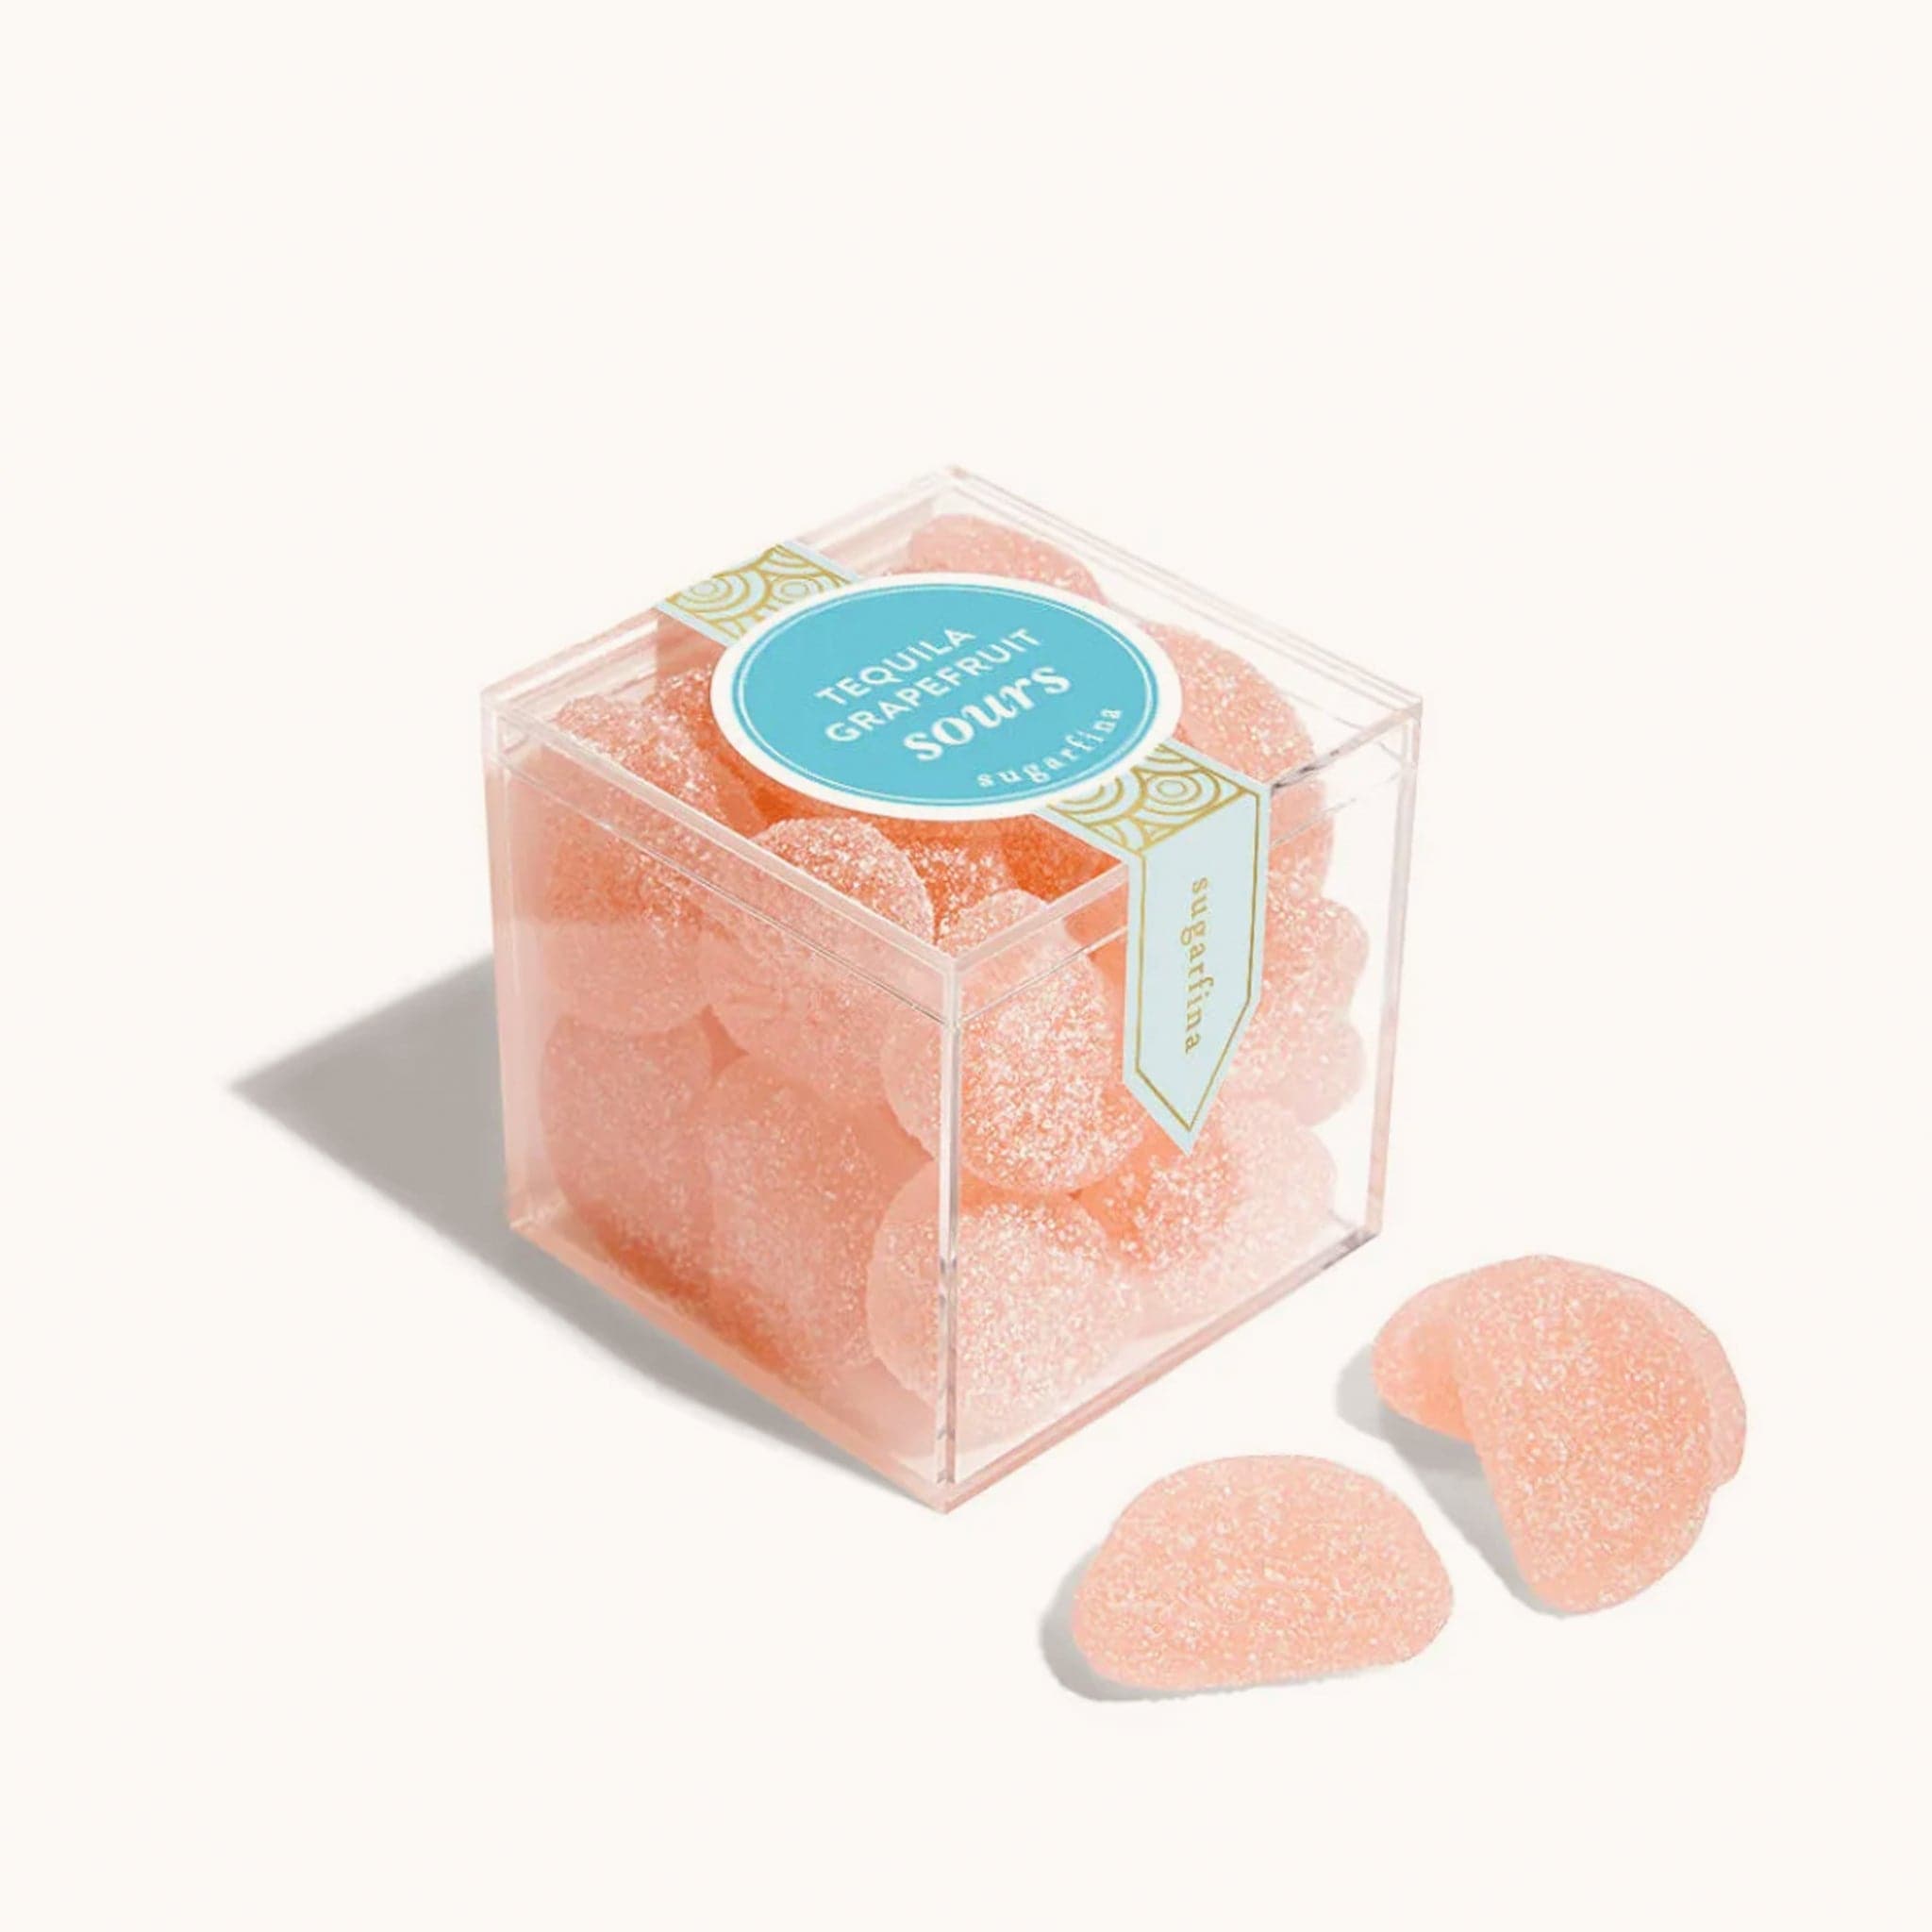 Plastic cube box filled with grapefruit gummies covered in sugar crystals. The clear box reads &#39;Tequila Grapefruit Sours&#39; on a deep teal label. Three pieces are placed in front of the box.  